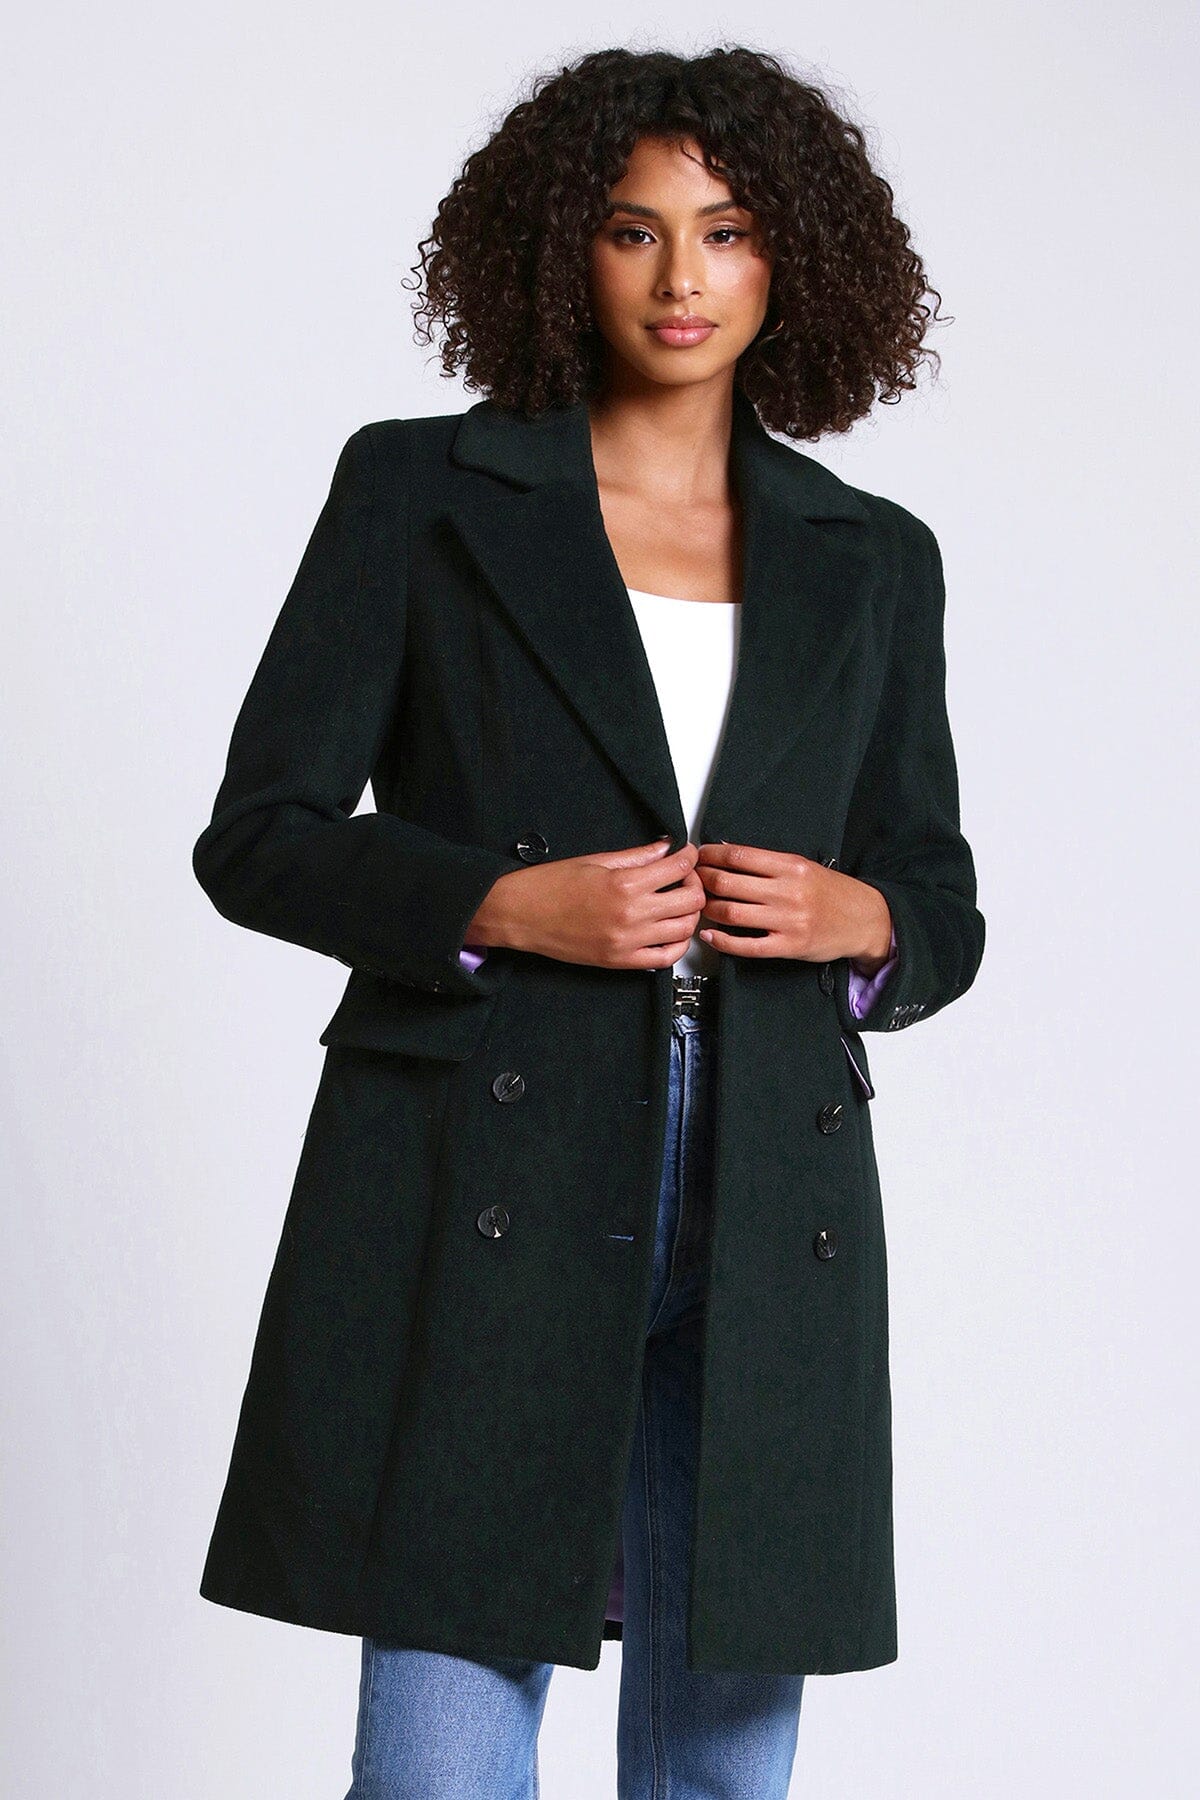 pine green wool blend double breasted coat jacket - figure flattering day to night coats jackets outerwear for women